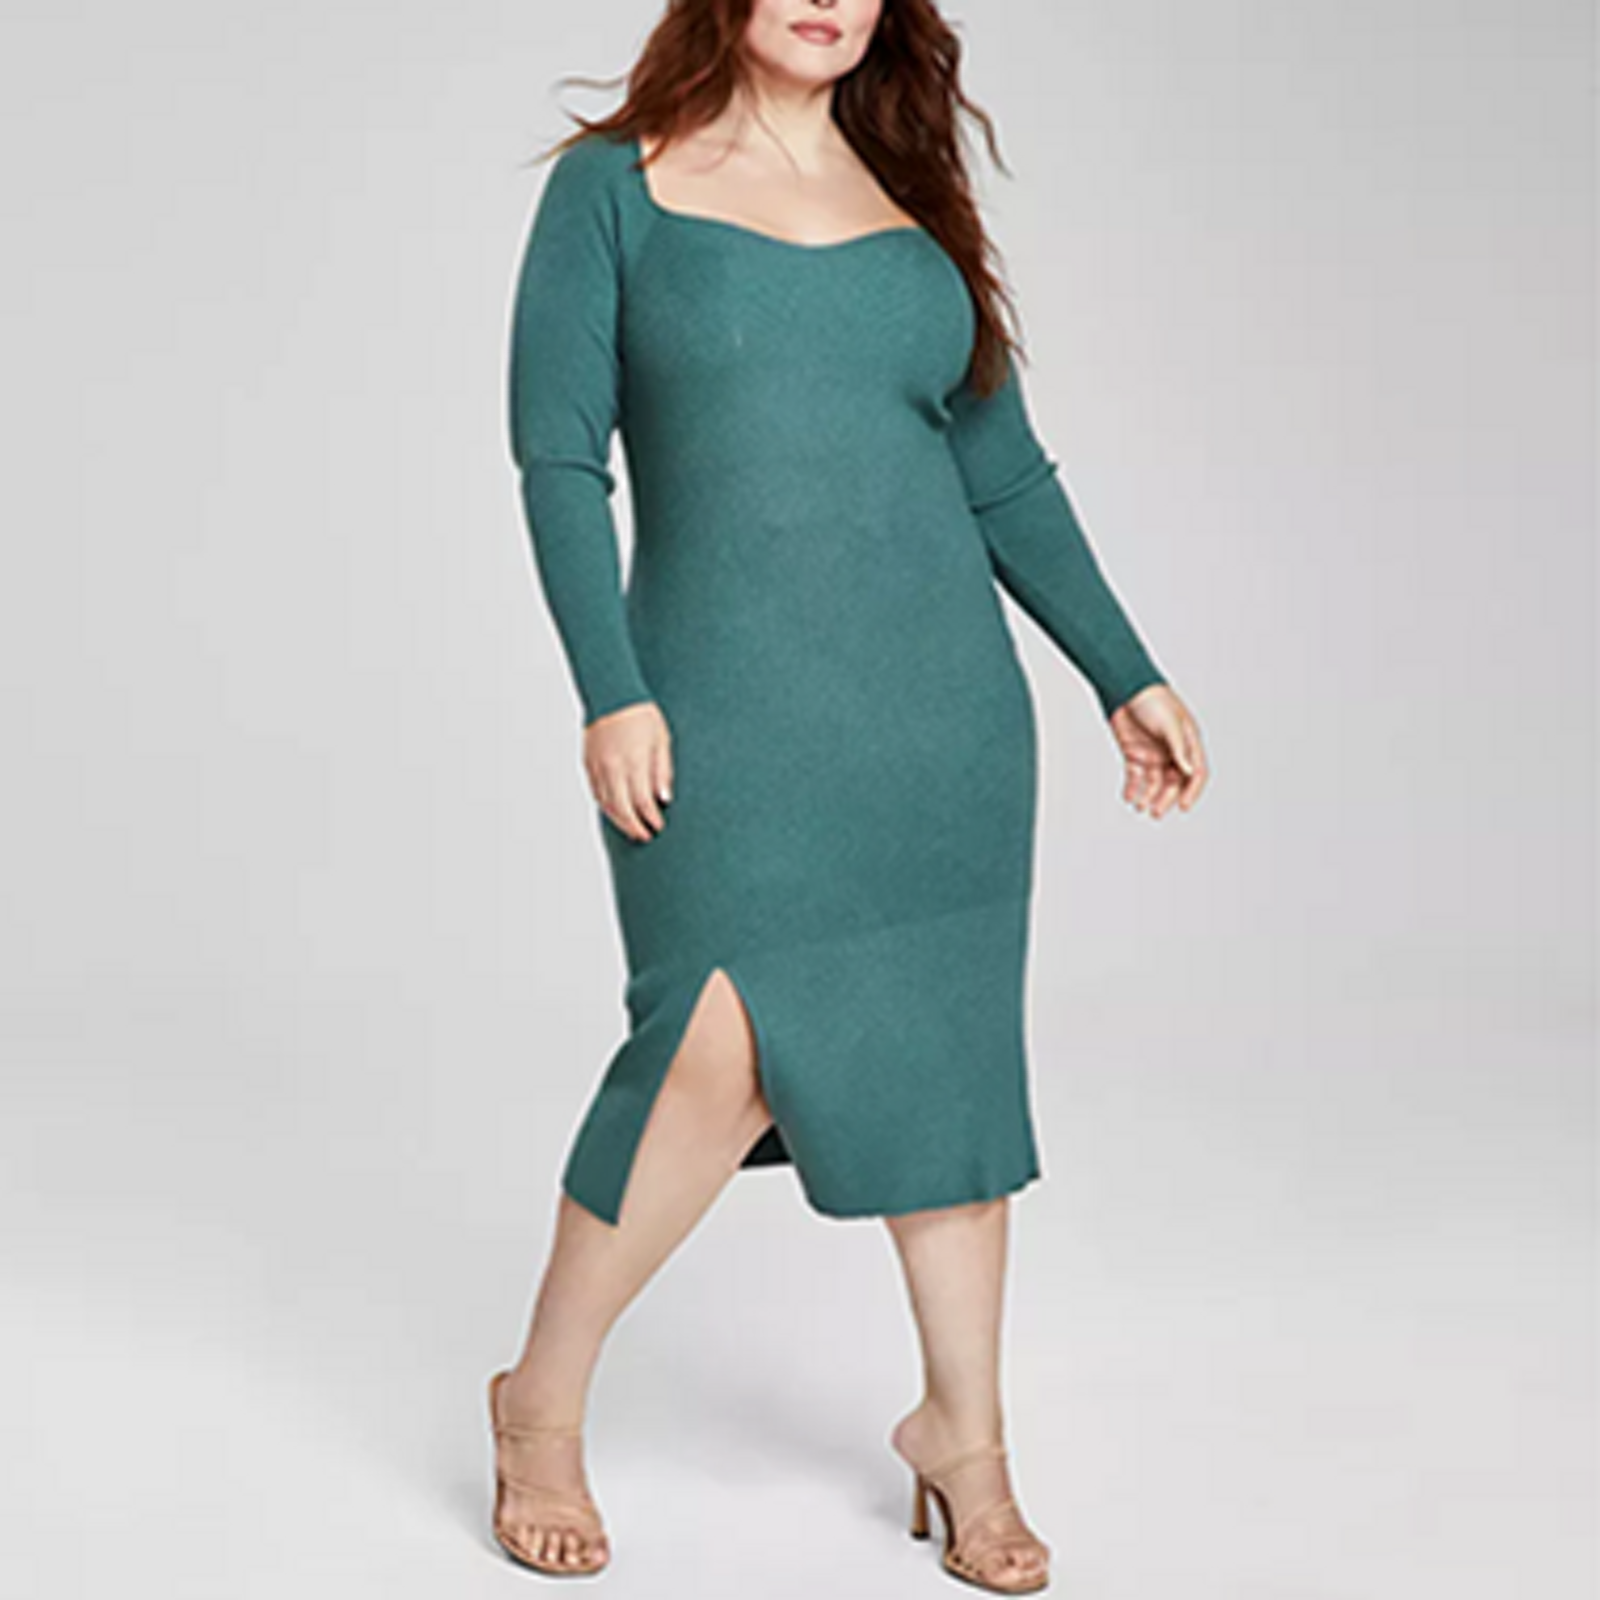 Free People Peasant Women's Clothing Sale & Clearance - Macy's